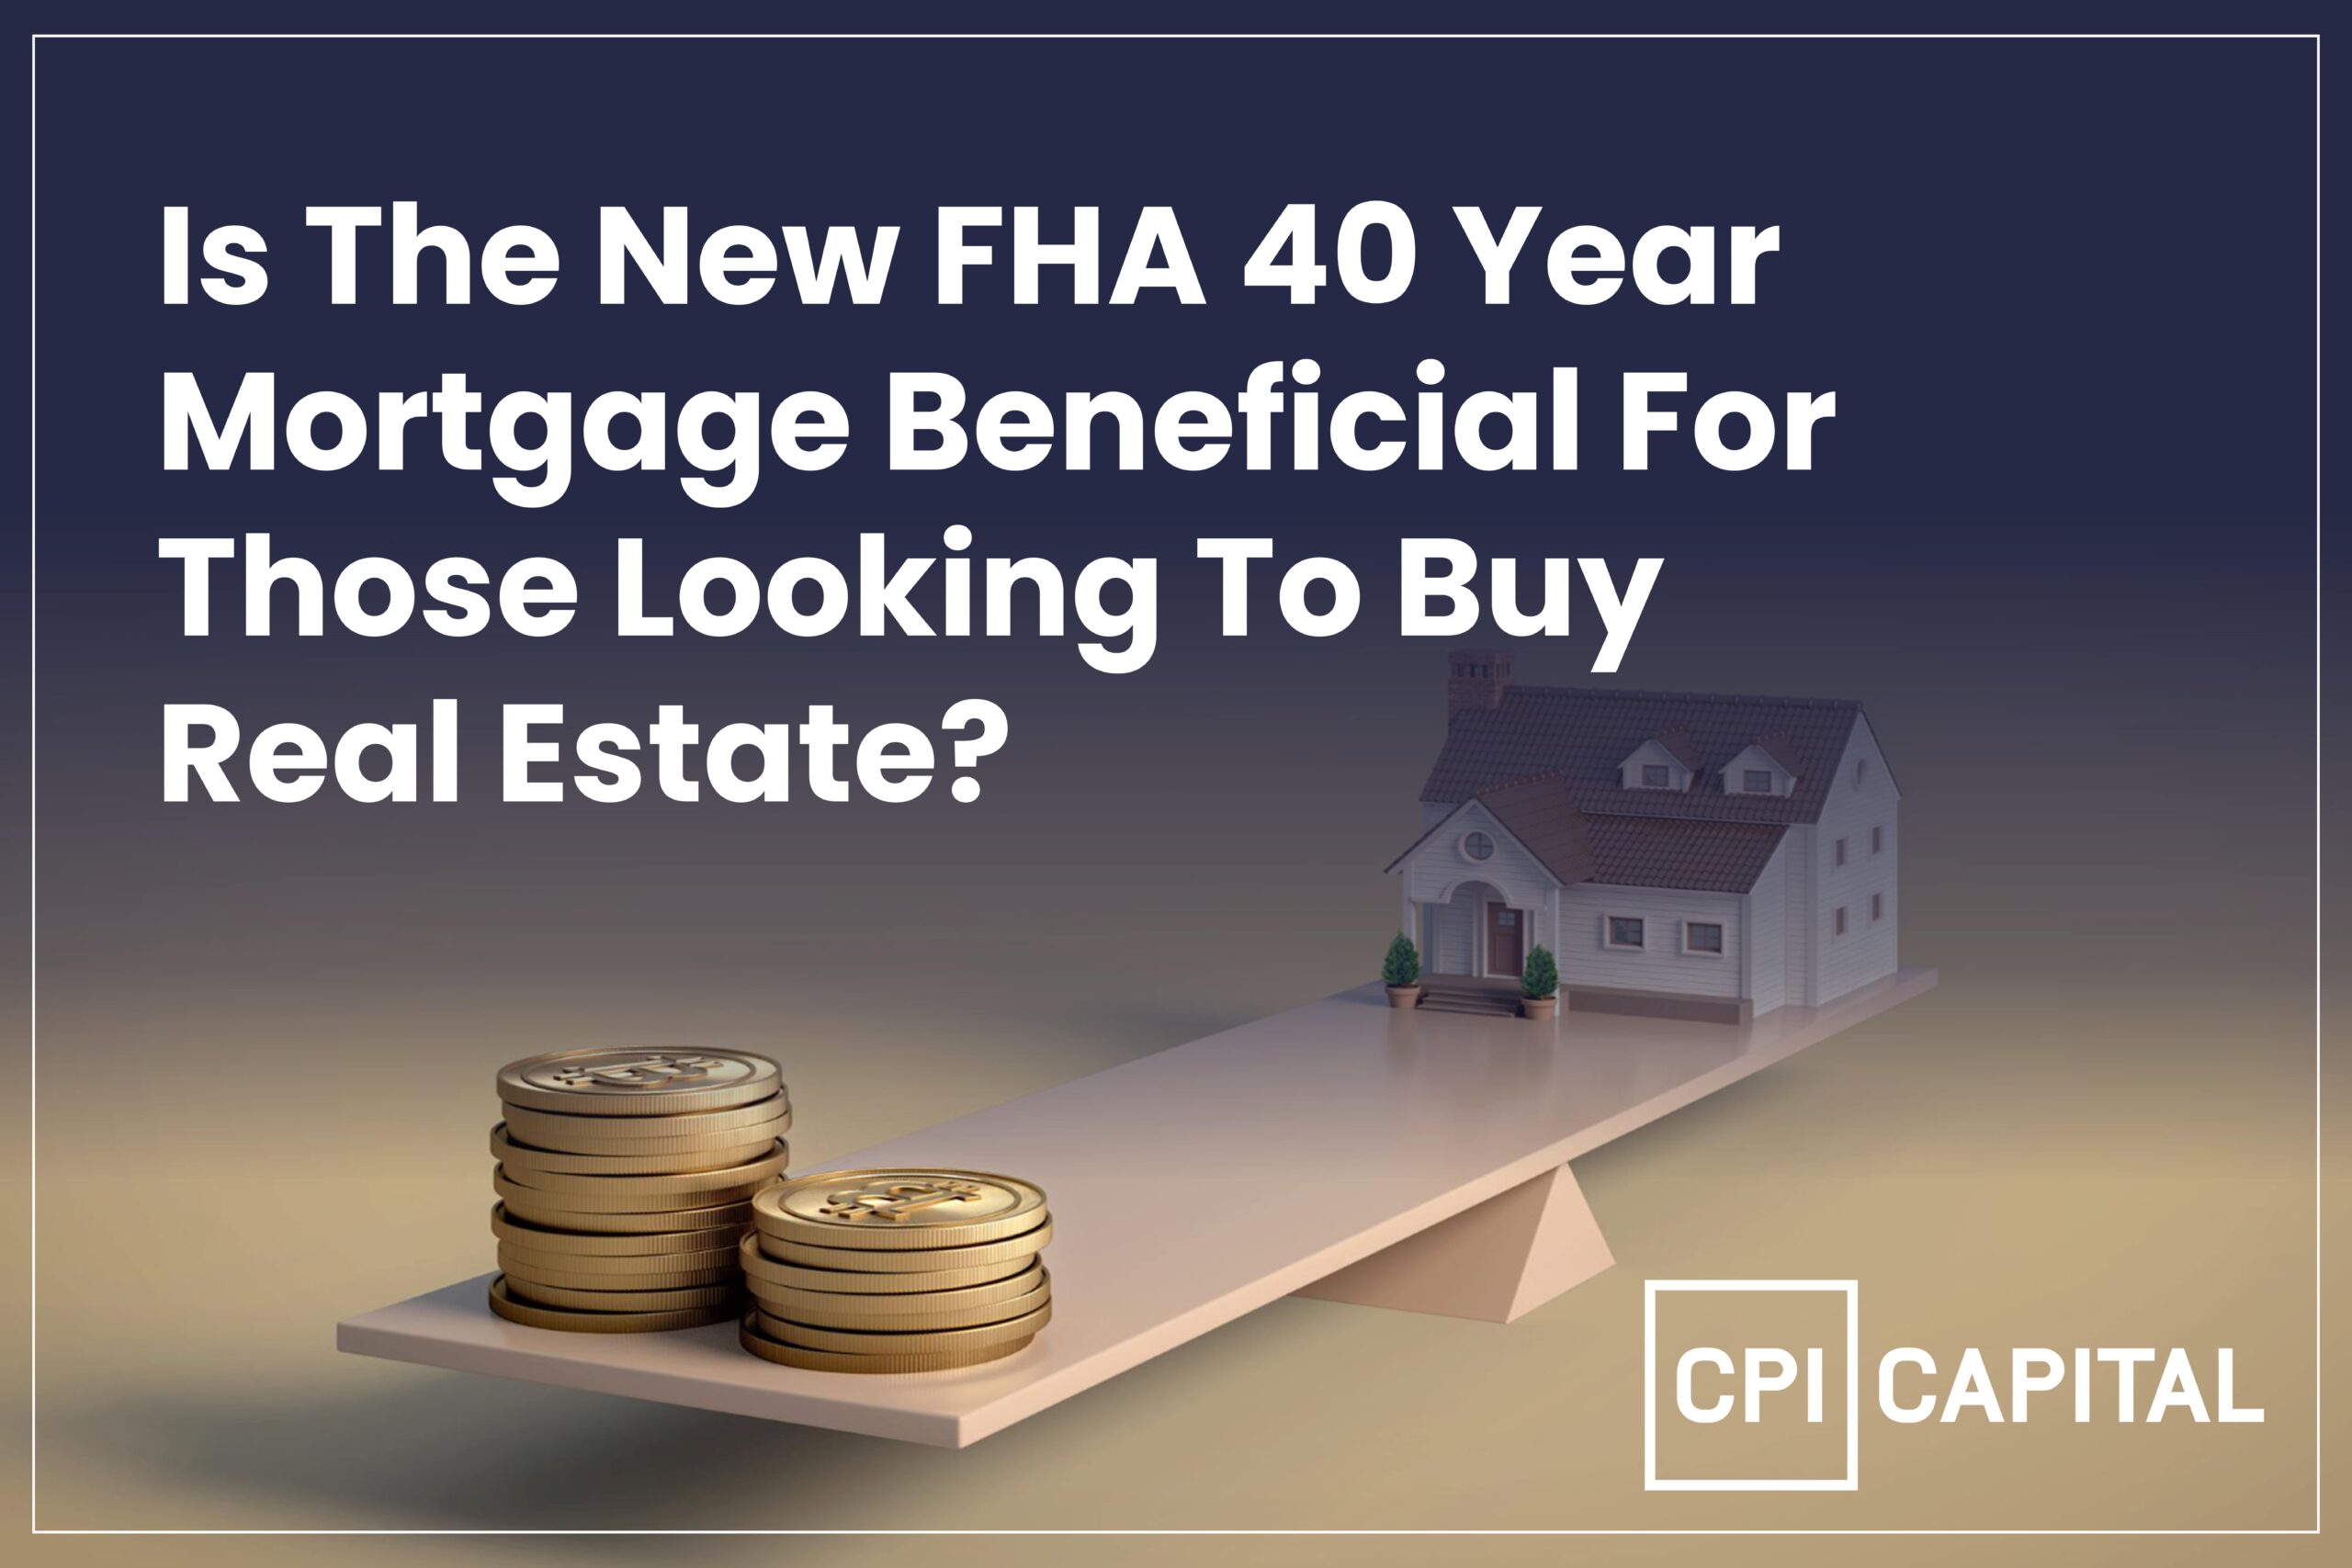 CPI capital_Is The New FHA 40 Year Mortgage Beneficial For Those Looking To Buy Real Estate